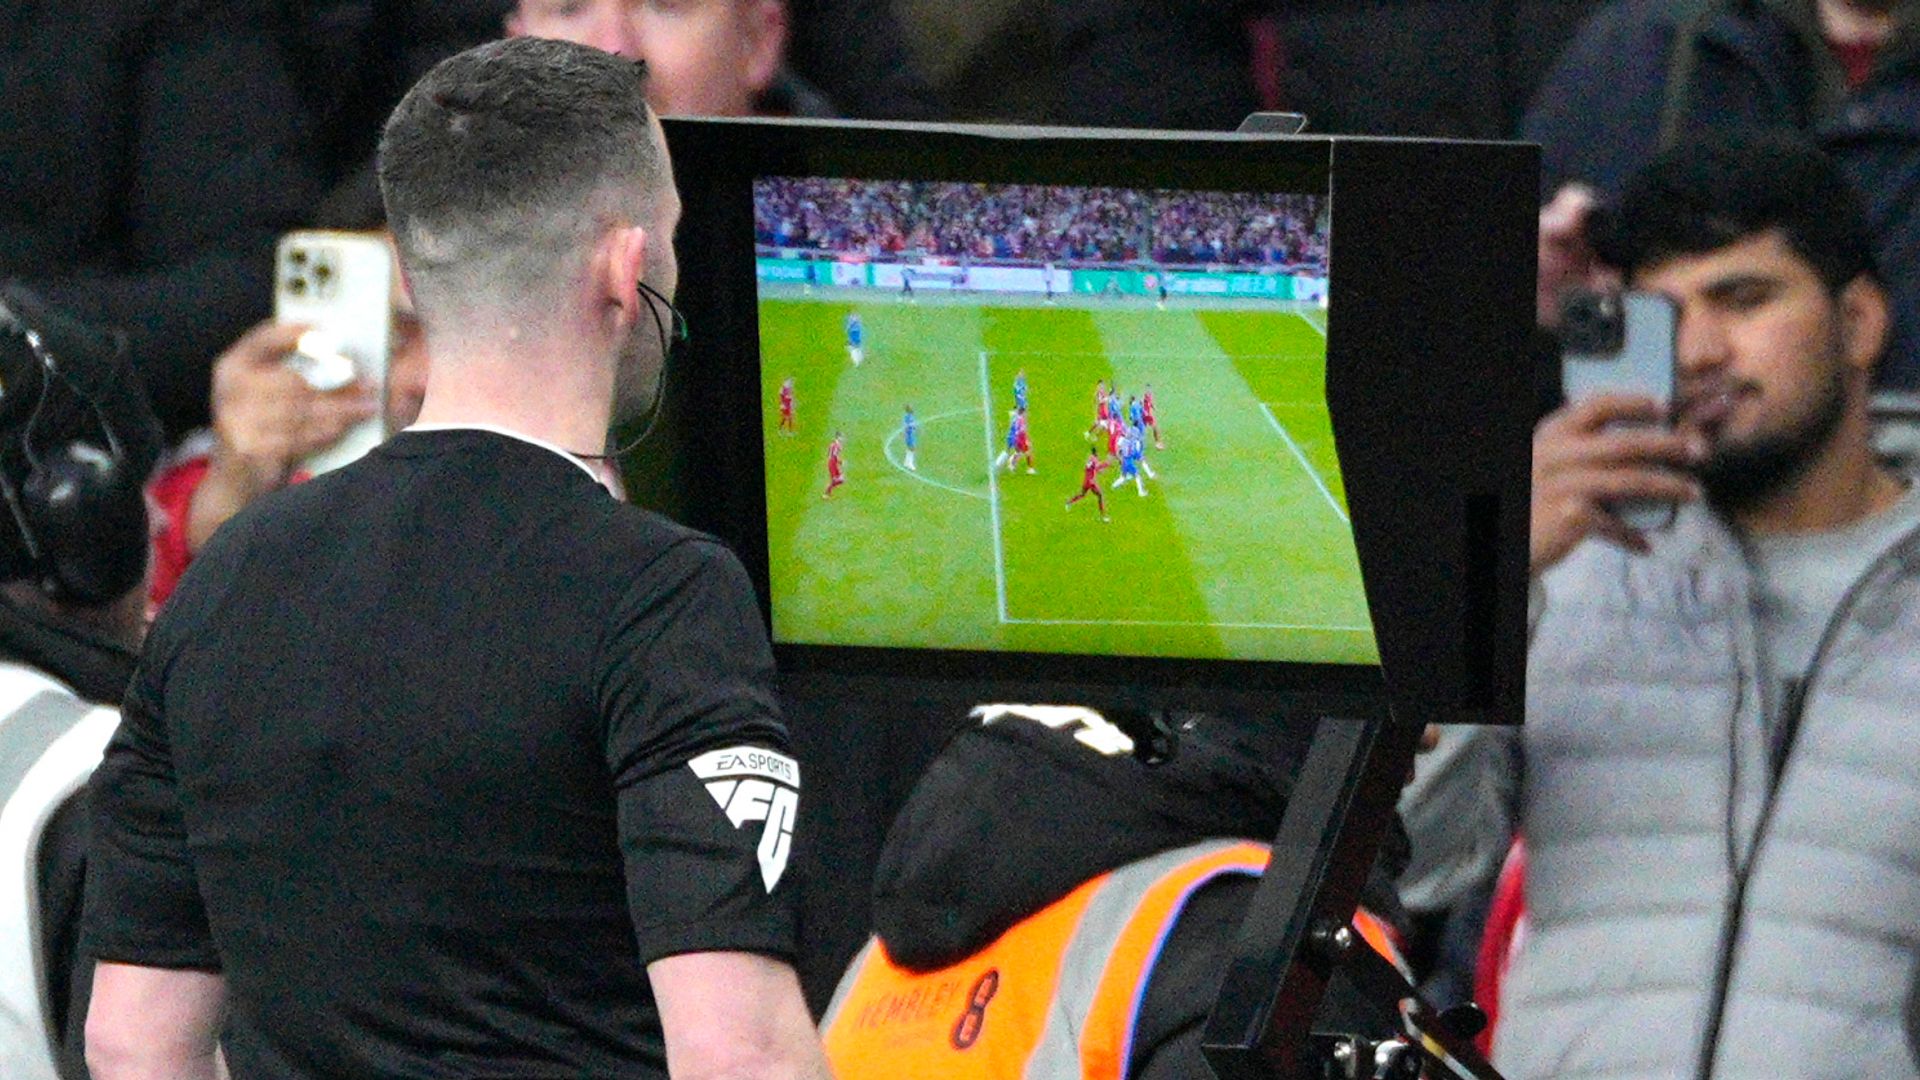 Majority of PL clubs want to keep VAR after Wolves proposal